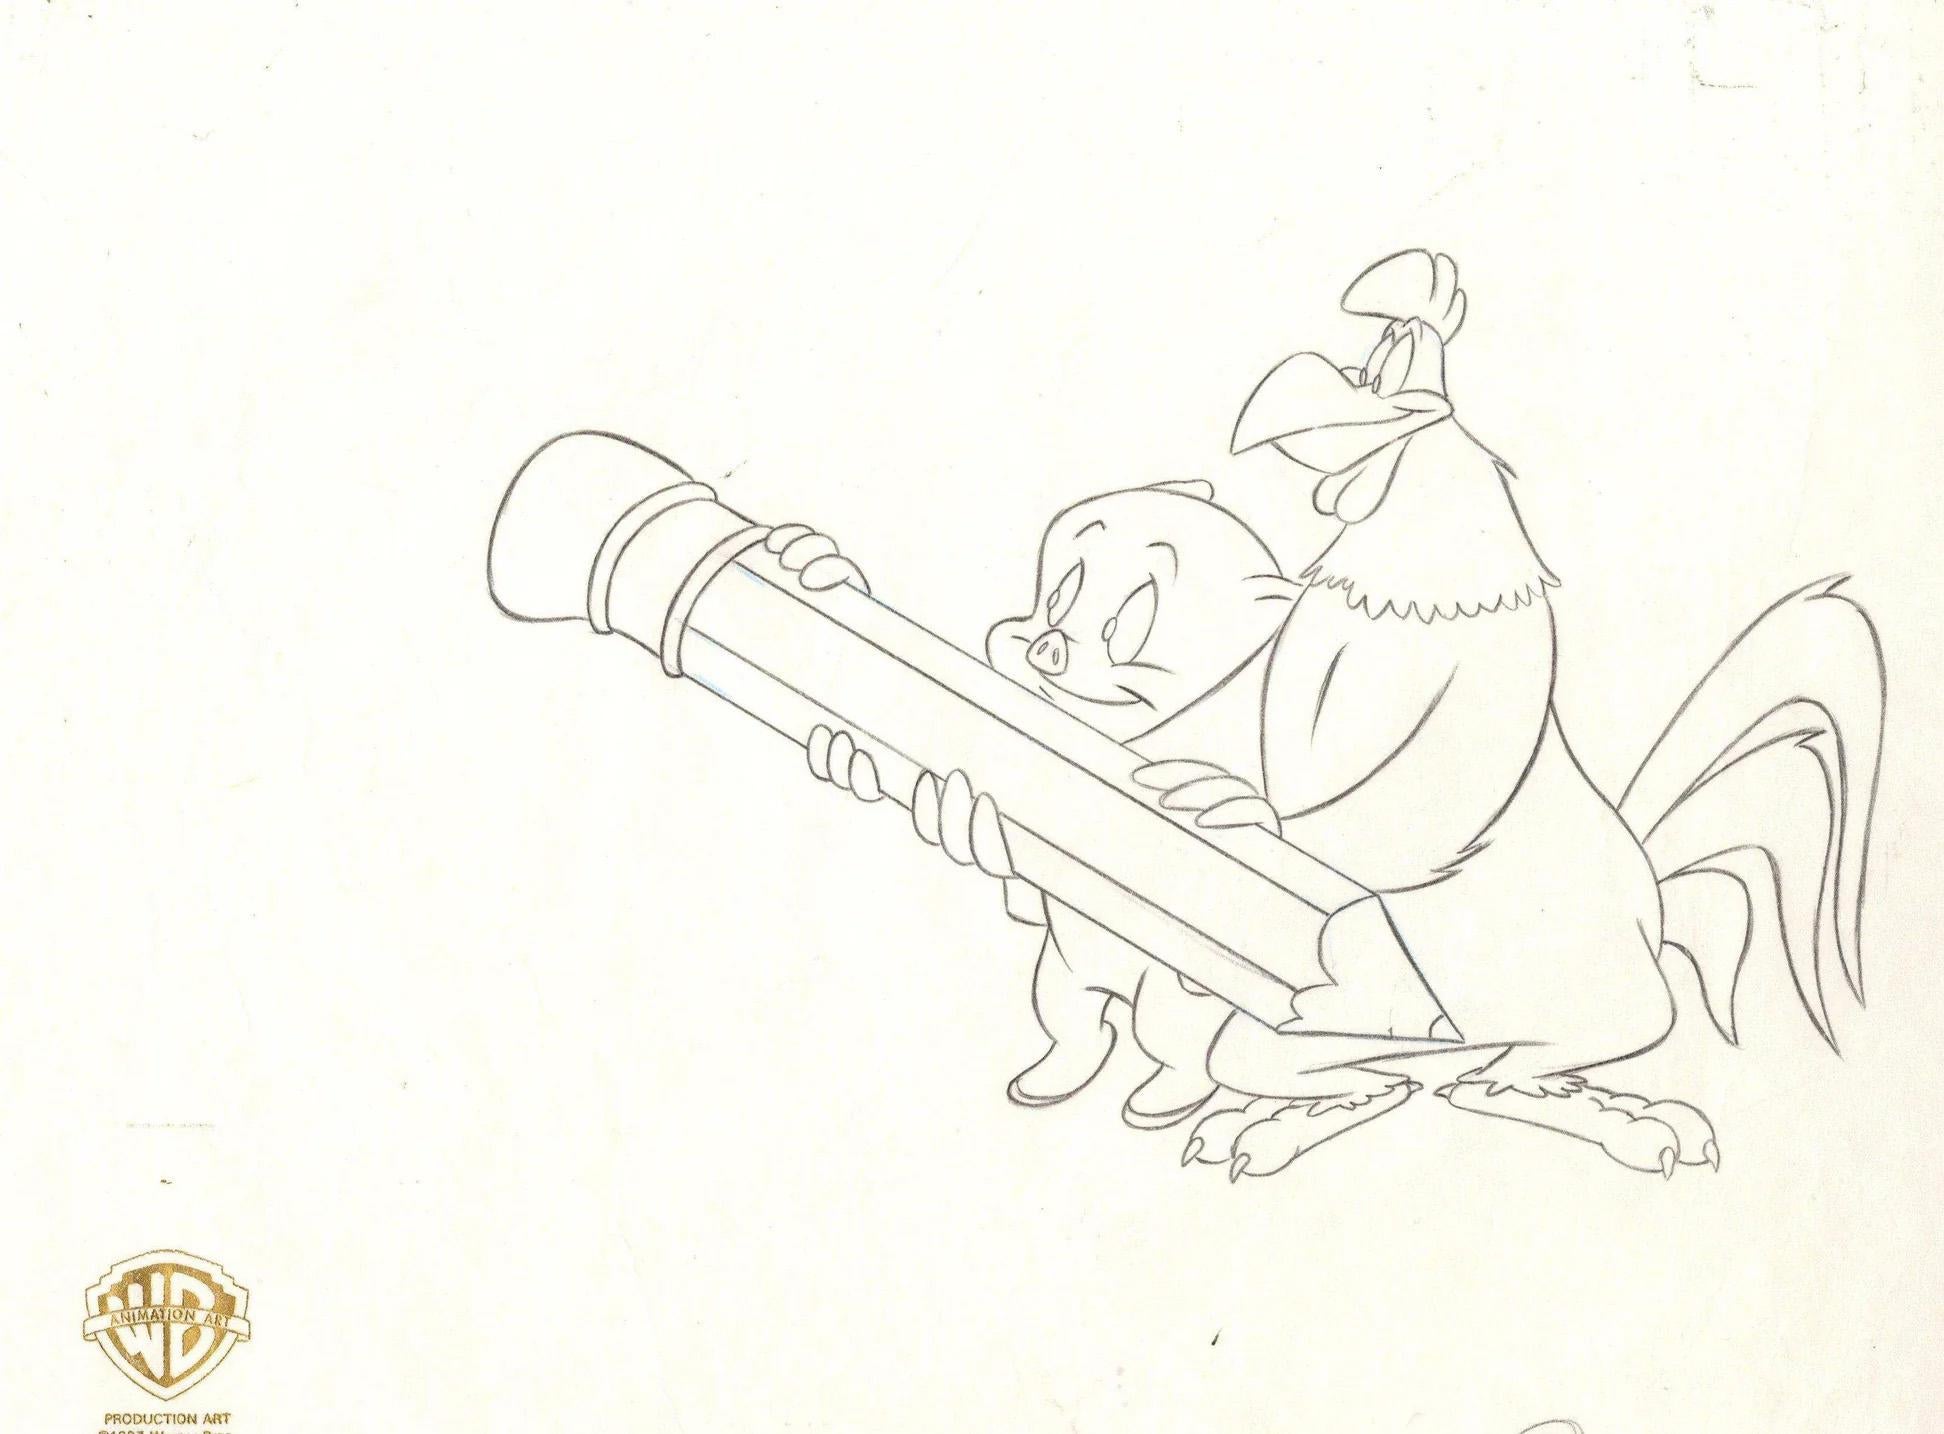 Looney Tunes Original Production Drawing: Porky and Foghorn - Art by Looney Tunes Studio Artists